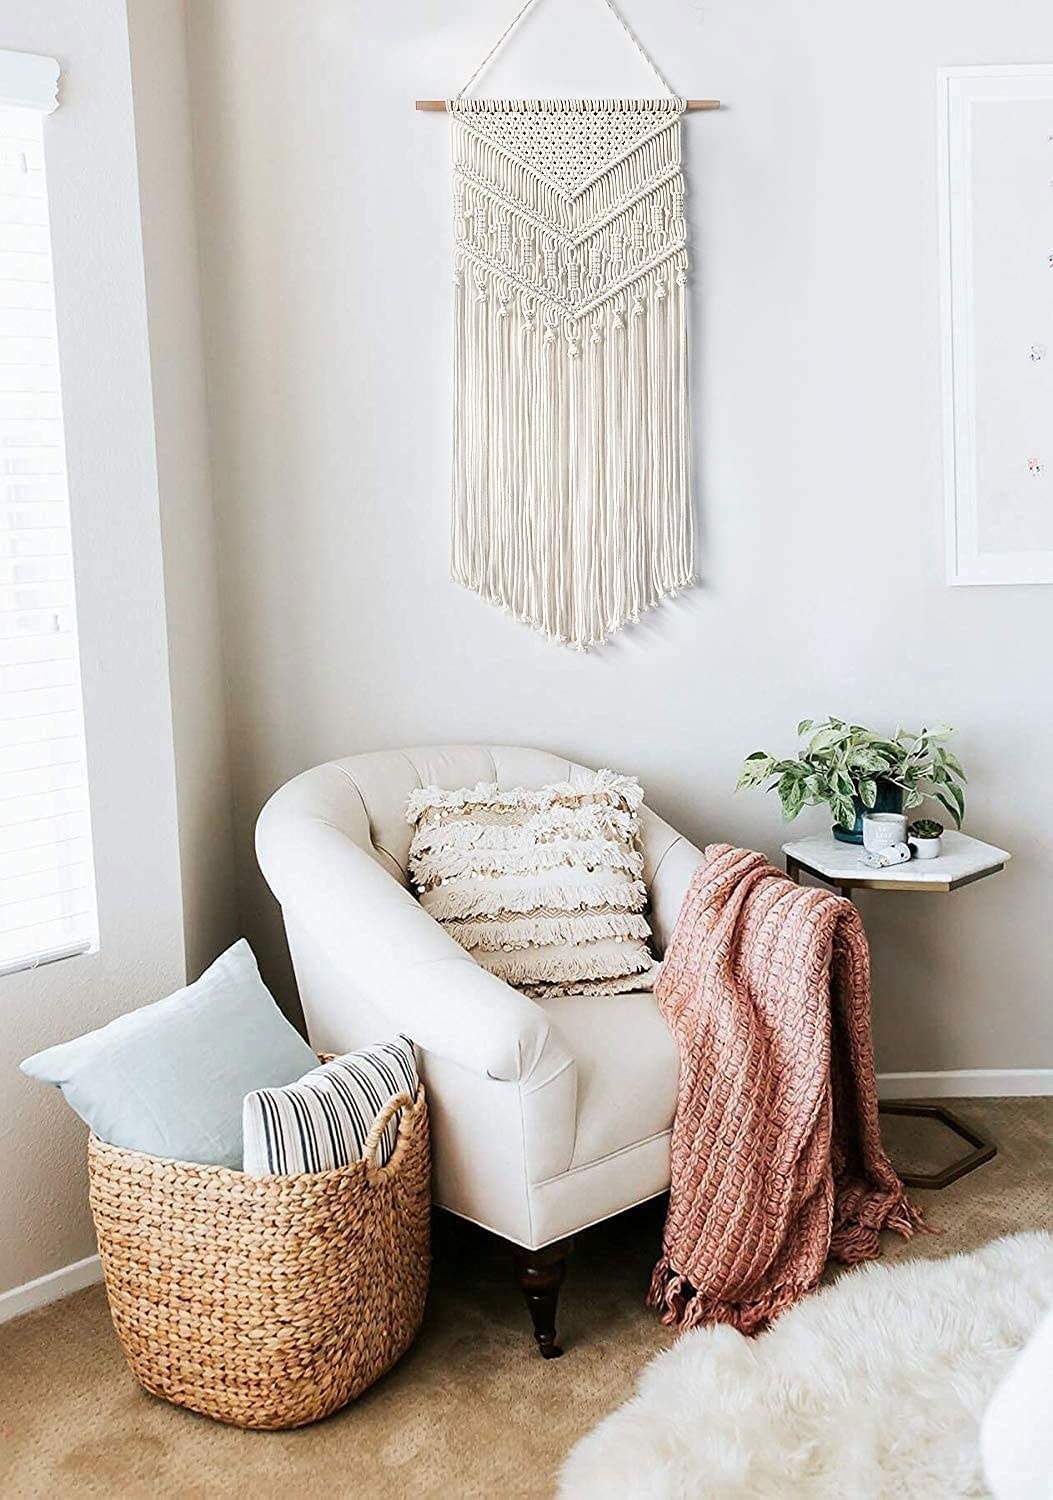 the macrame wall hanging on a wall behind a comfy chair and a basket of throw pillows